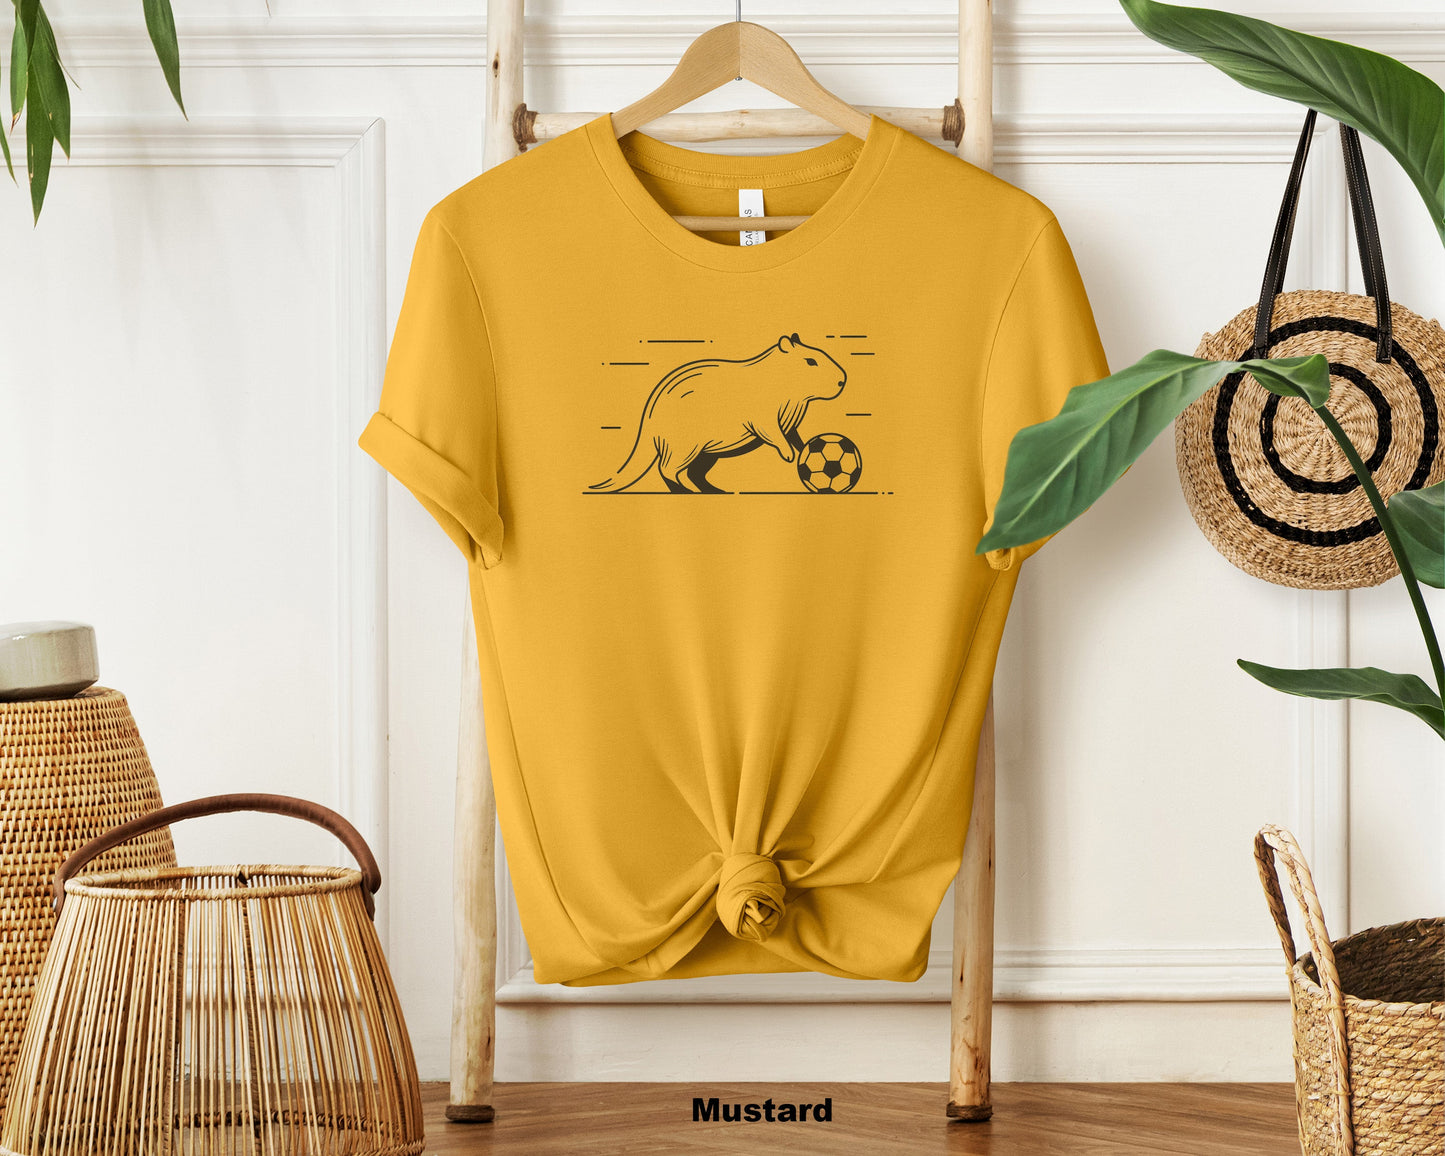 "Cute Capybara Playing Football Unisex Cotton T-shirt - Funny Animal Sports Tee for Football Lovers"